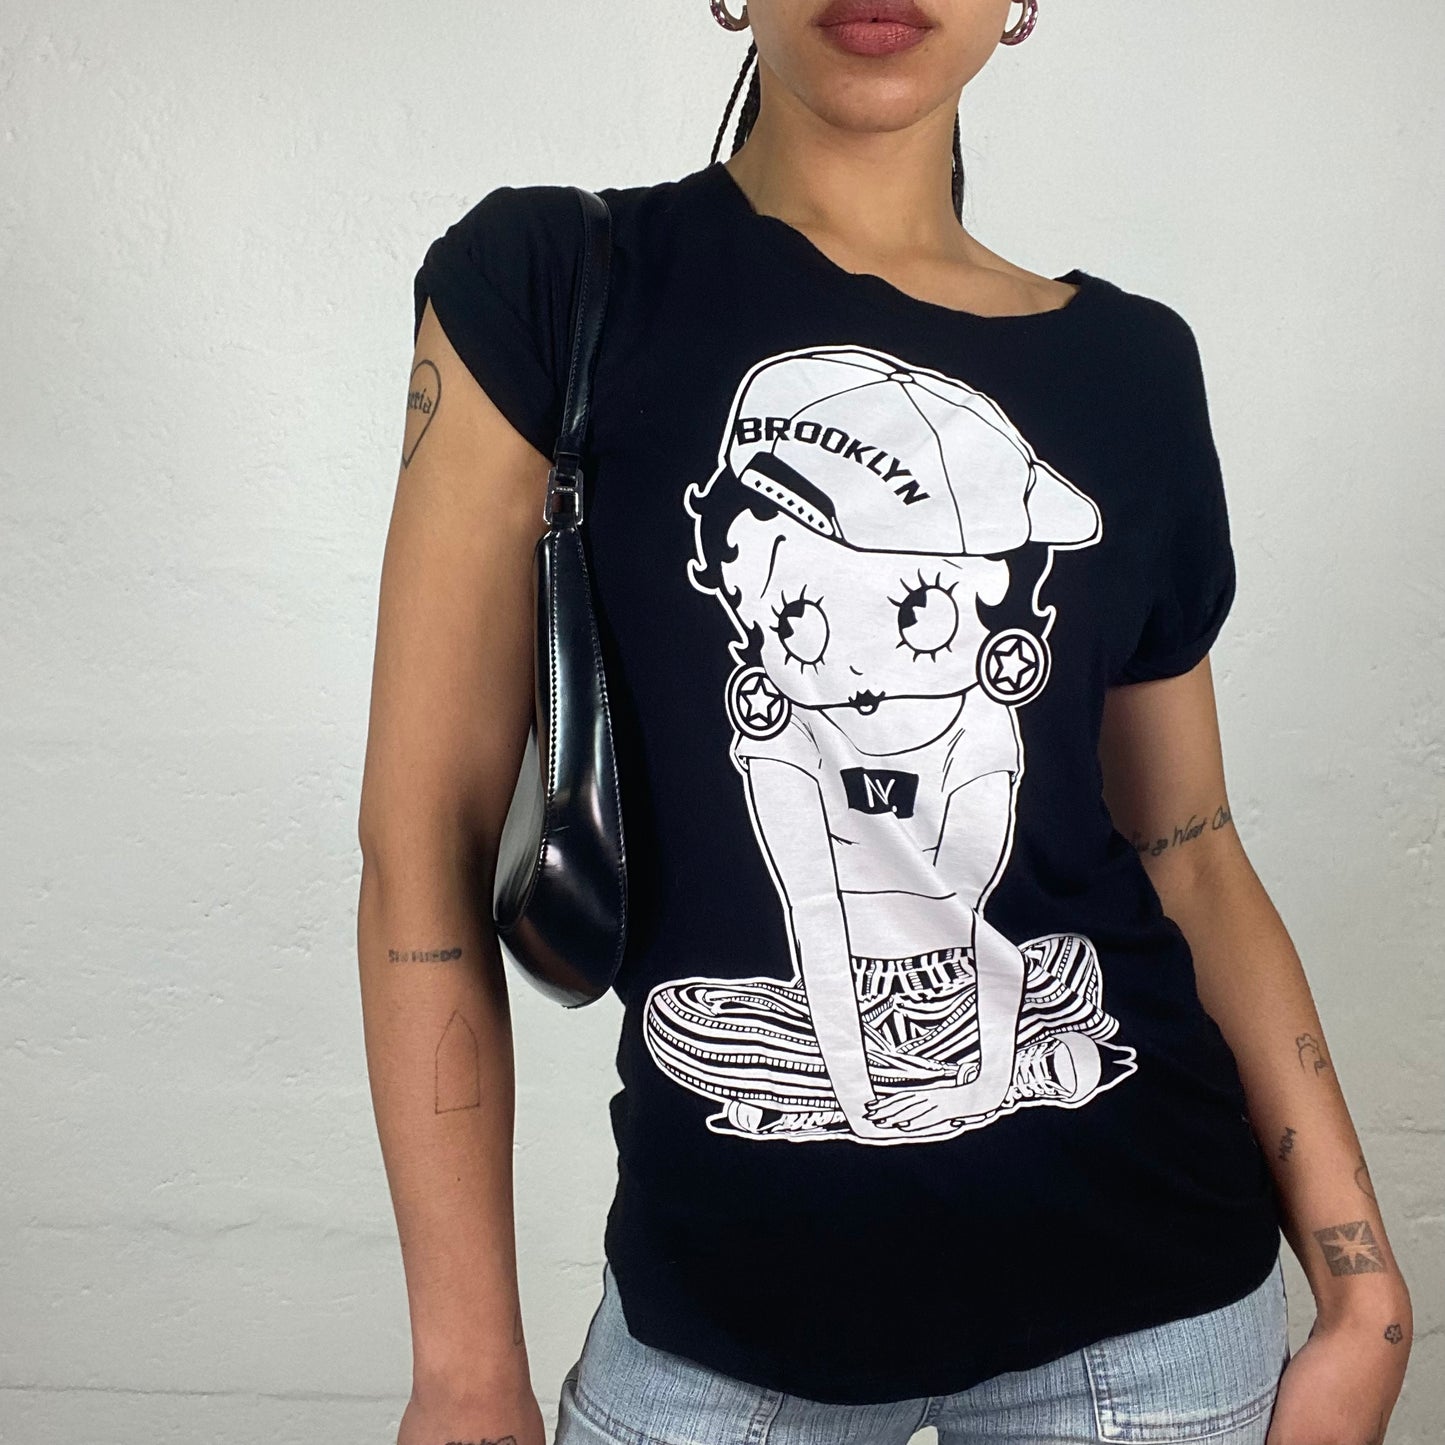 Vintage 2000’s Downtown Girl Hip Hop Black One Shoulder T-Shirt with Monotoned Betty Boop Print (S)